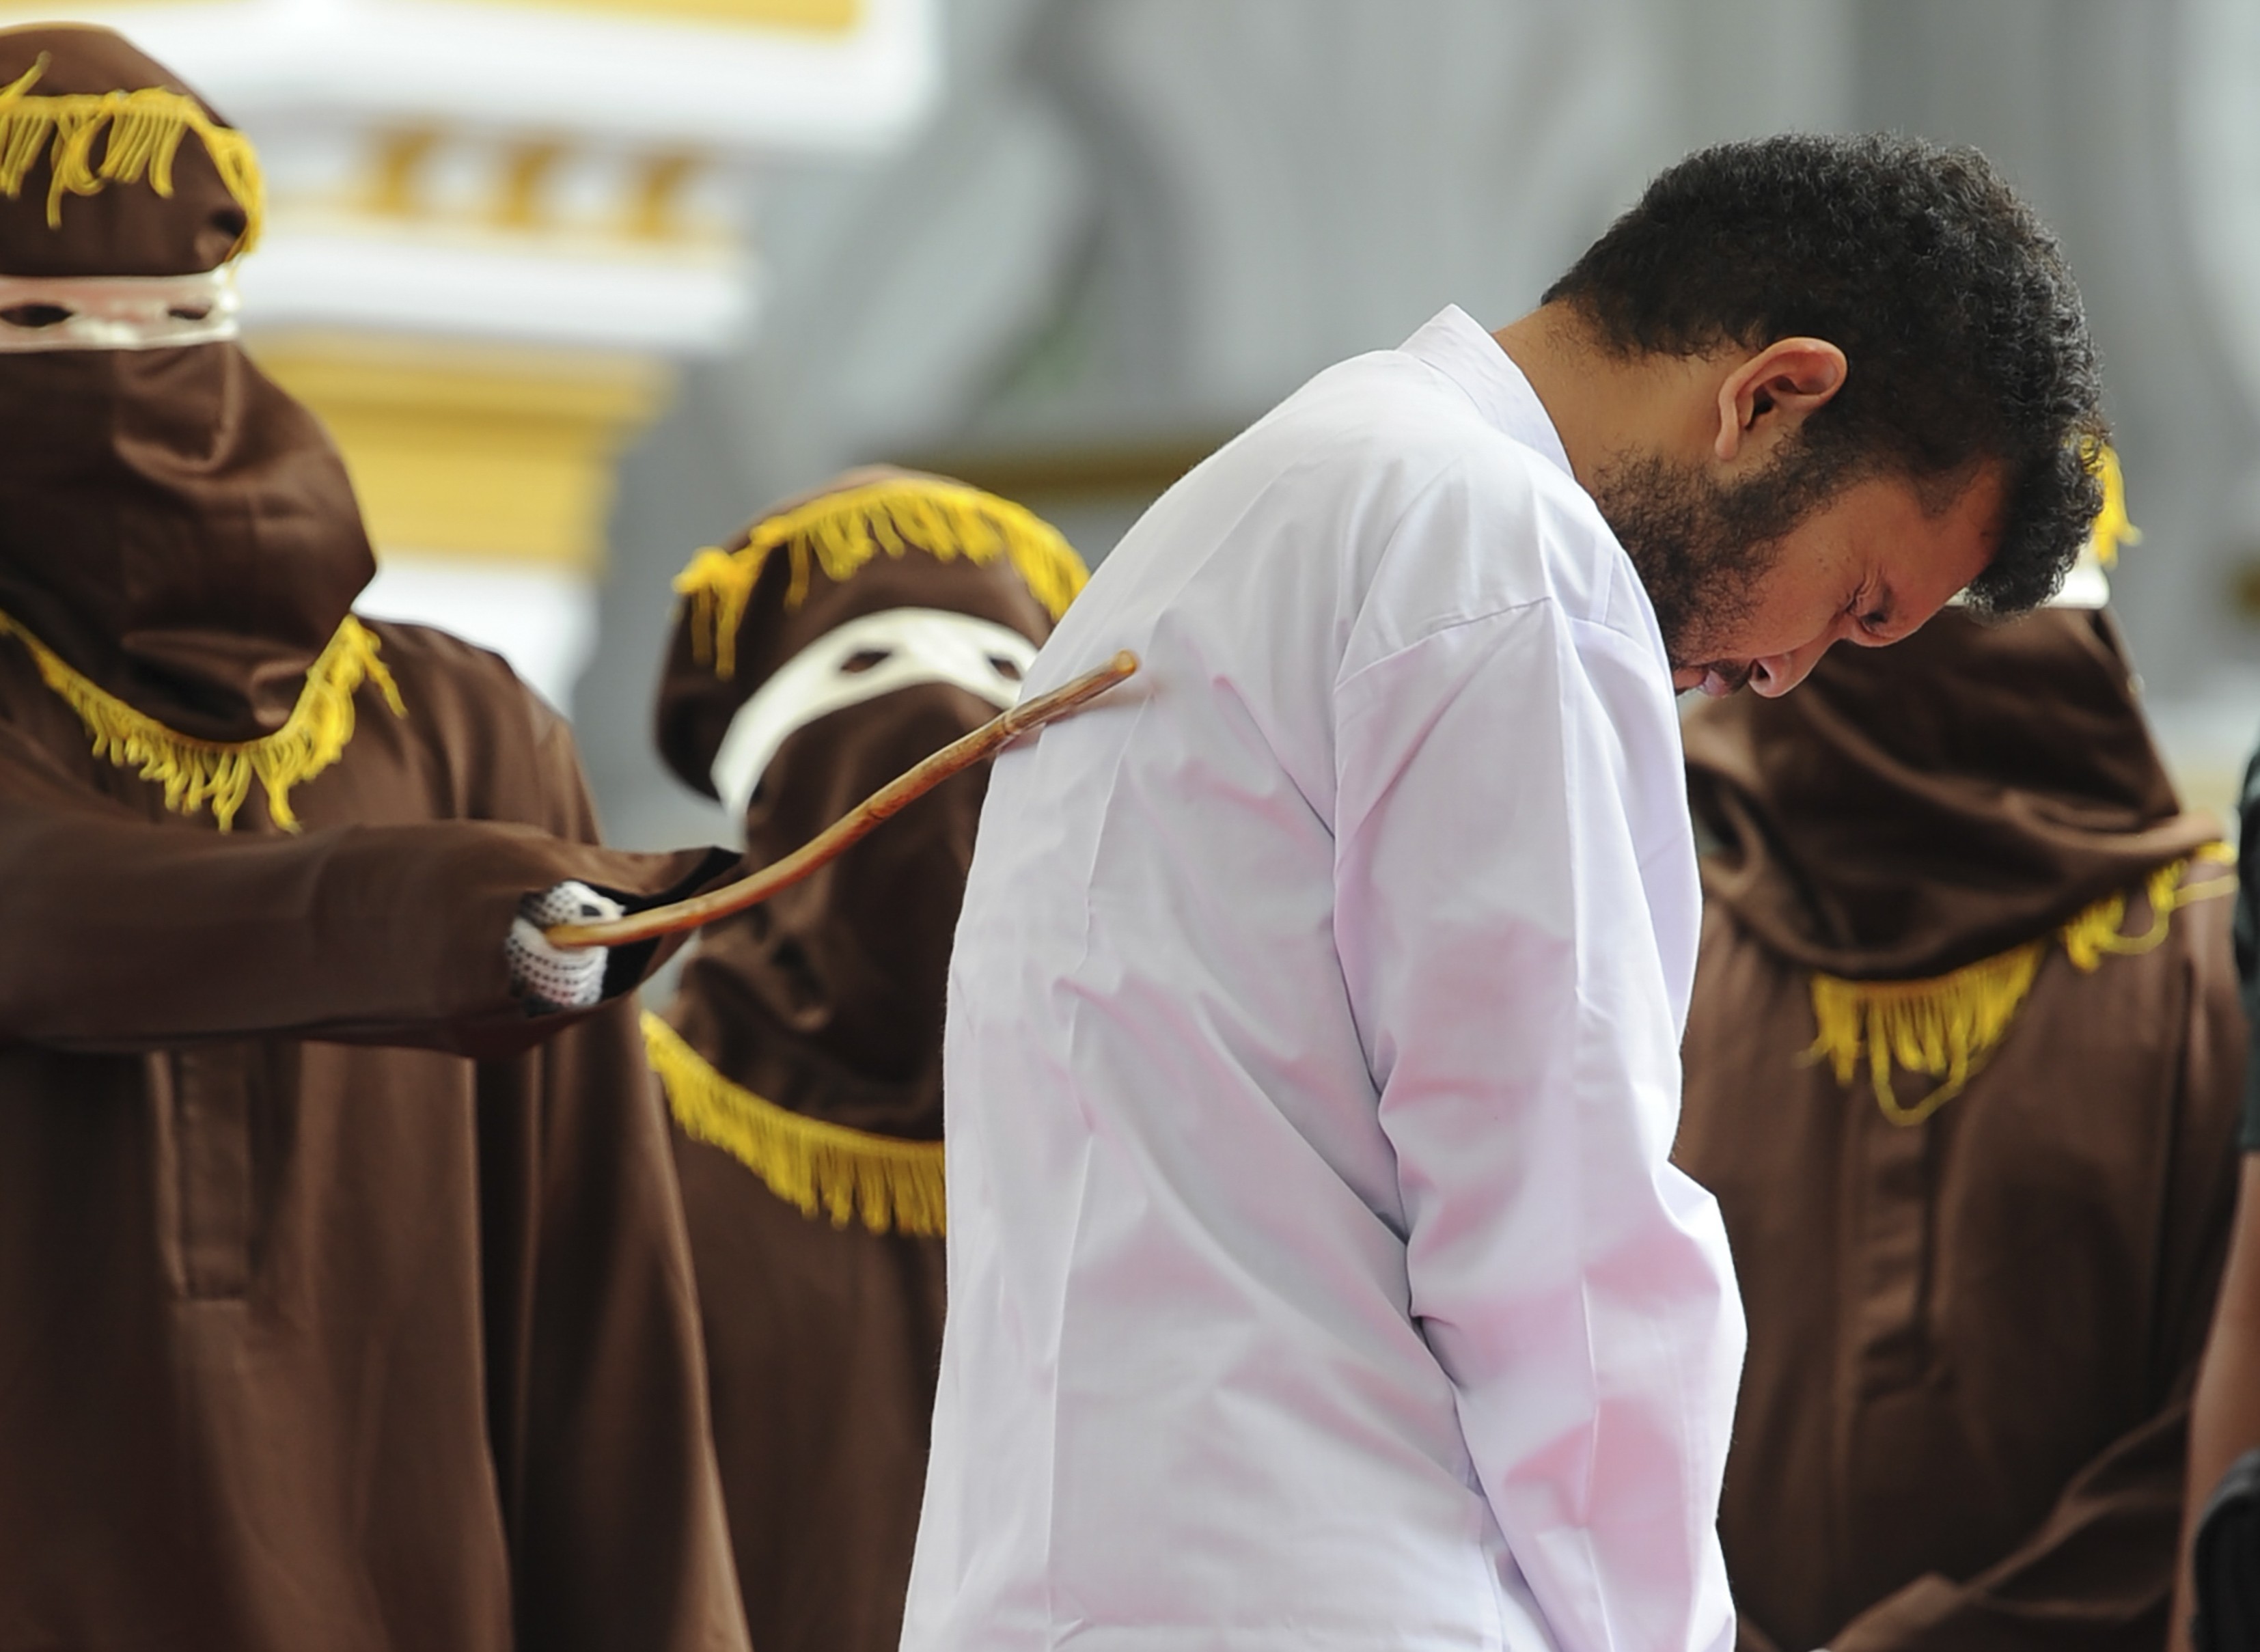 One of two Indonesian gay men is publicly caned for having sex, in a first for the Muslim-majority country where there are concerns over mounting hostility towards the gay community. Photo: AFP